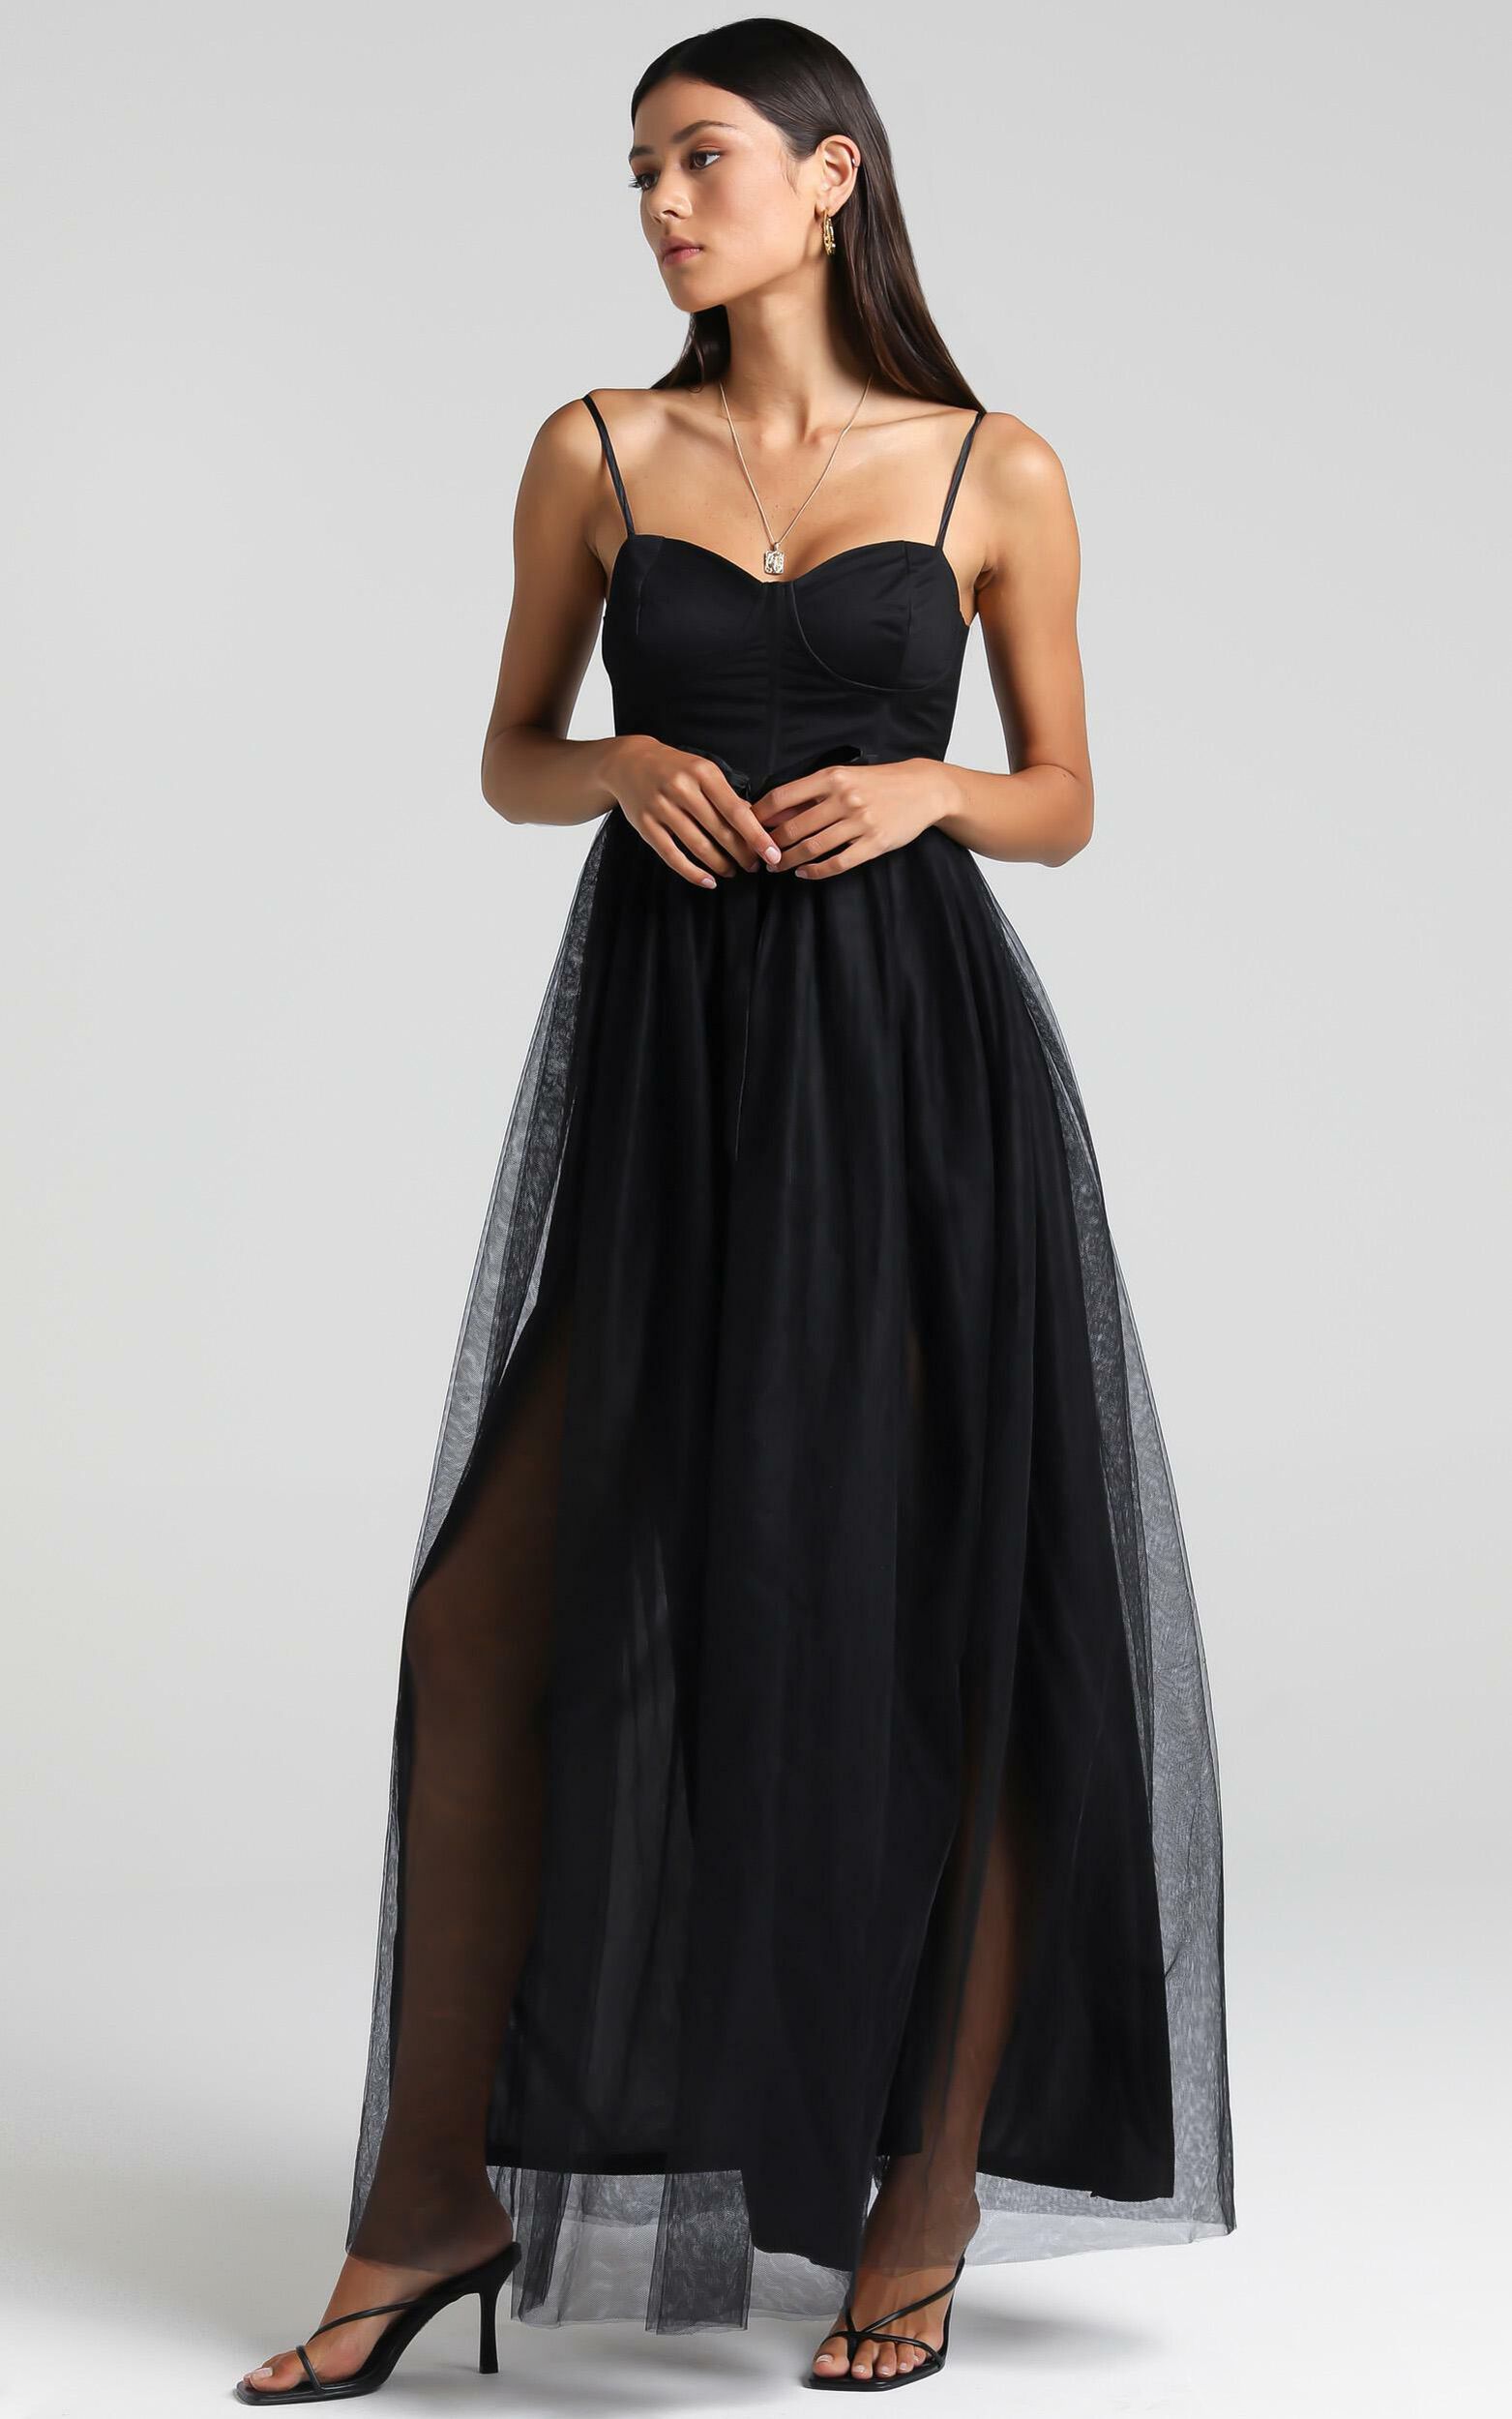 At The Altar Midaxi Dress - Bodice Dress in Black - 04, BLK1